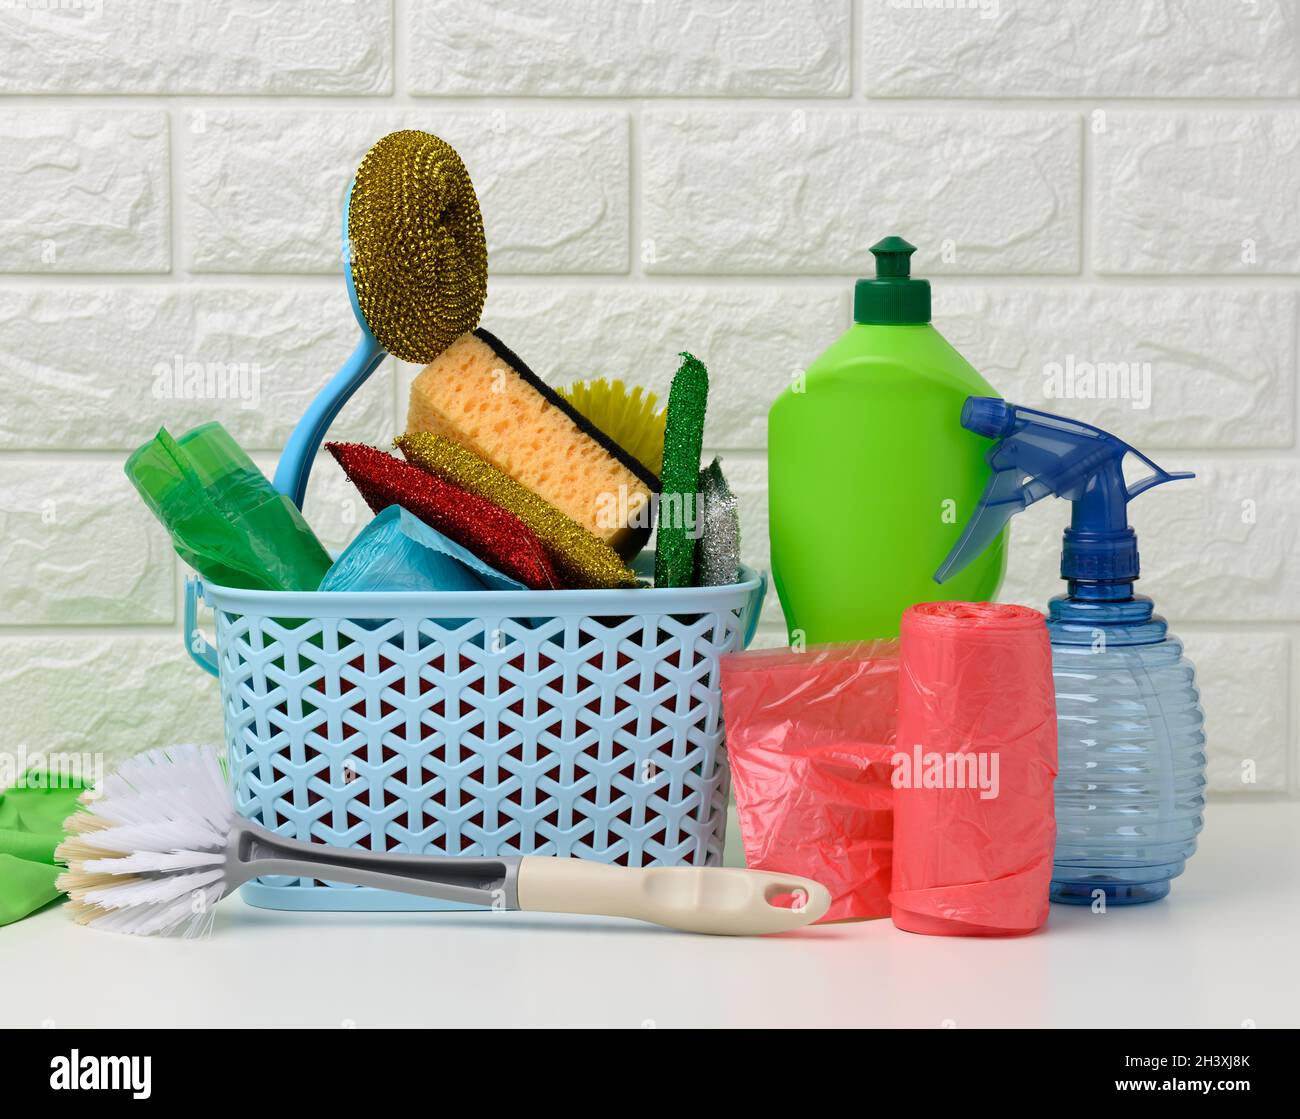 Plastic basket with brushes, disinfectant in a bottle, rubber gloves on the background of a white brick wall Stock Photo